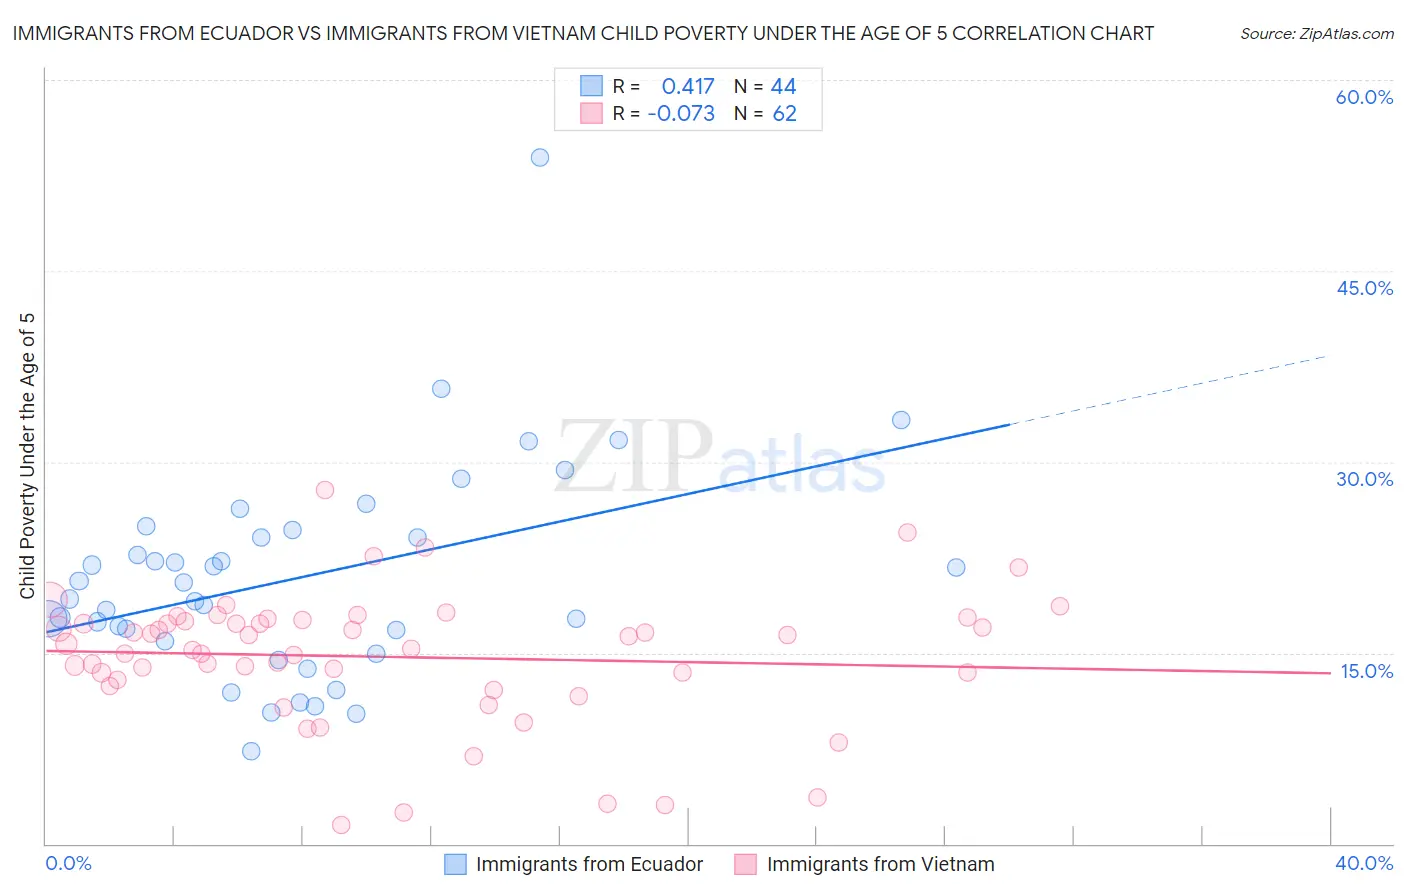 Immigrants from Ecuador vs Immigrants from Vietnam Child Poverty Under the Age of 5